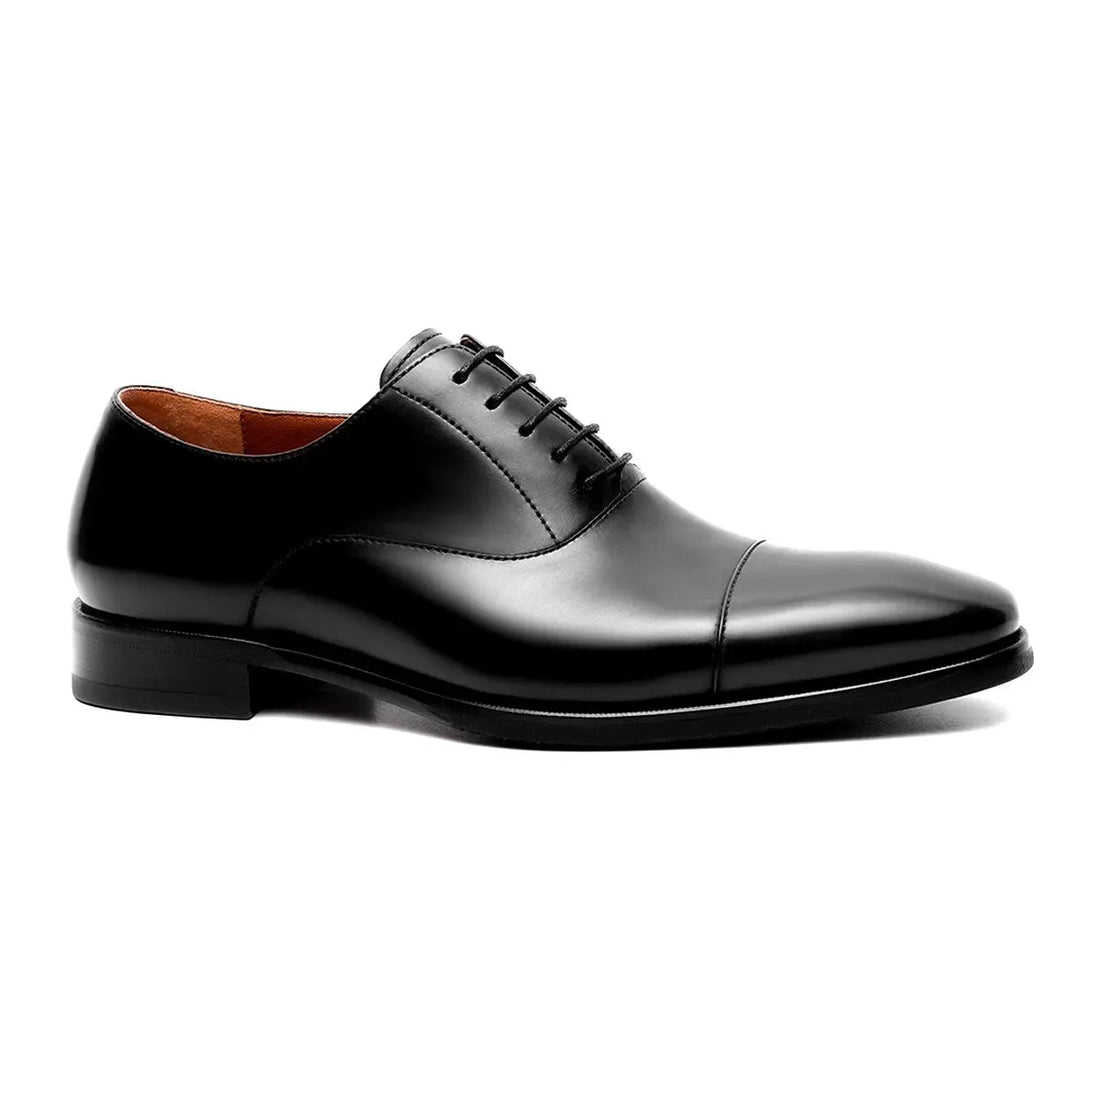 Man's Daily Oxford Formal Business Leather Shoes 212301A LEIZILEI